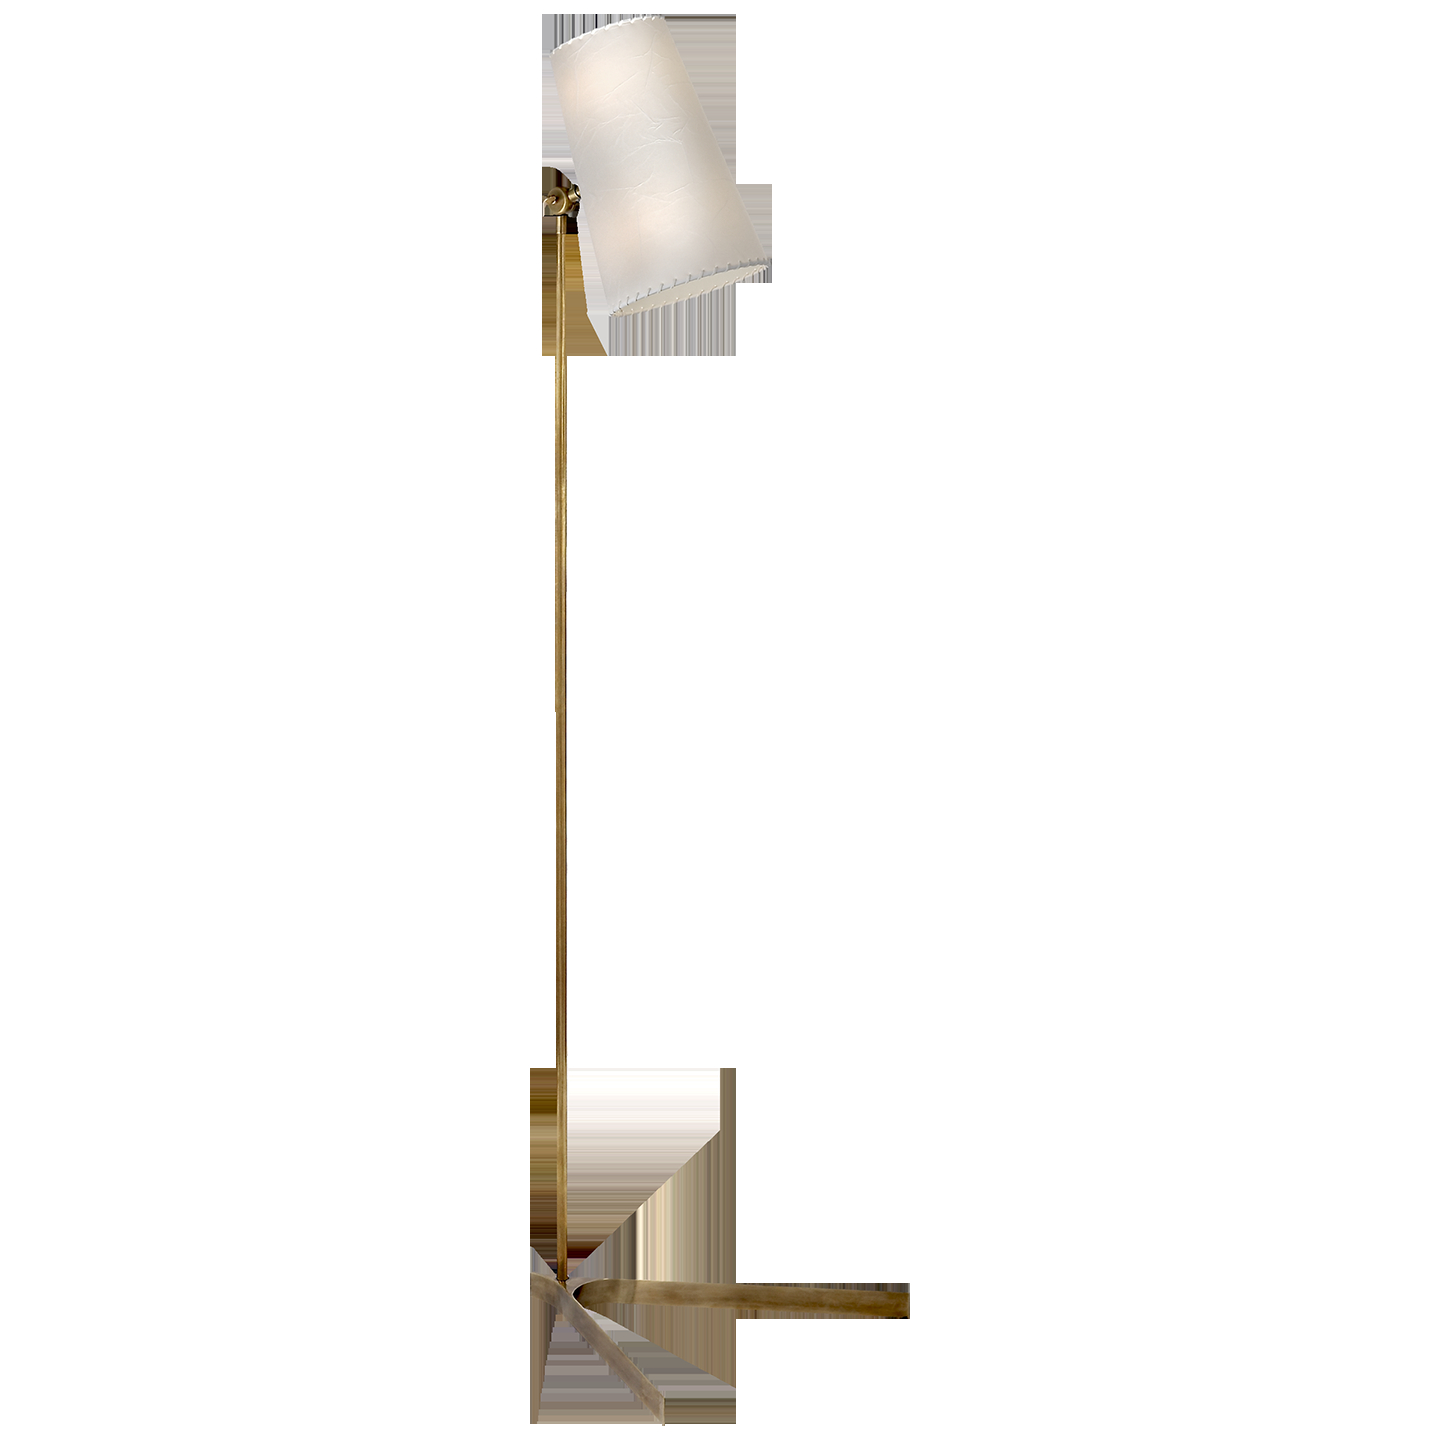 Arpont Floor Lamp In Hand Rubbed Antique Brass With inside sizing 1440 X 1440